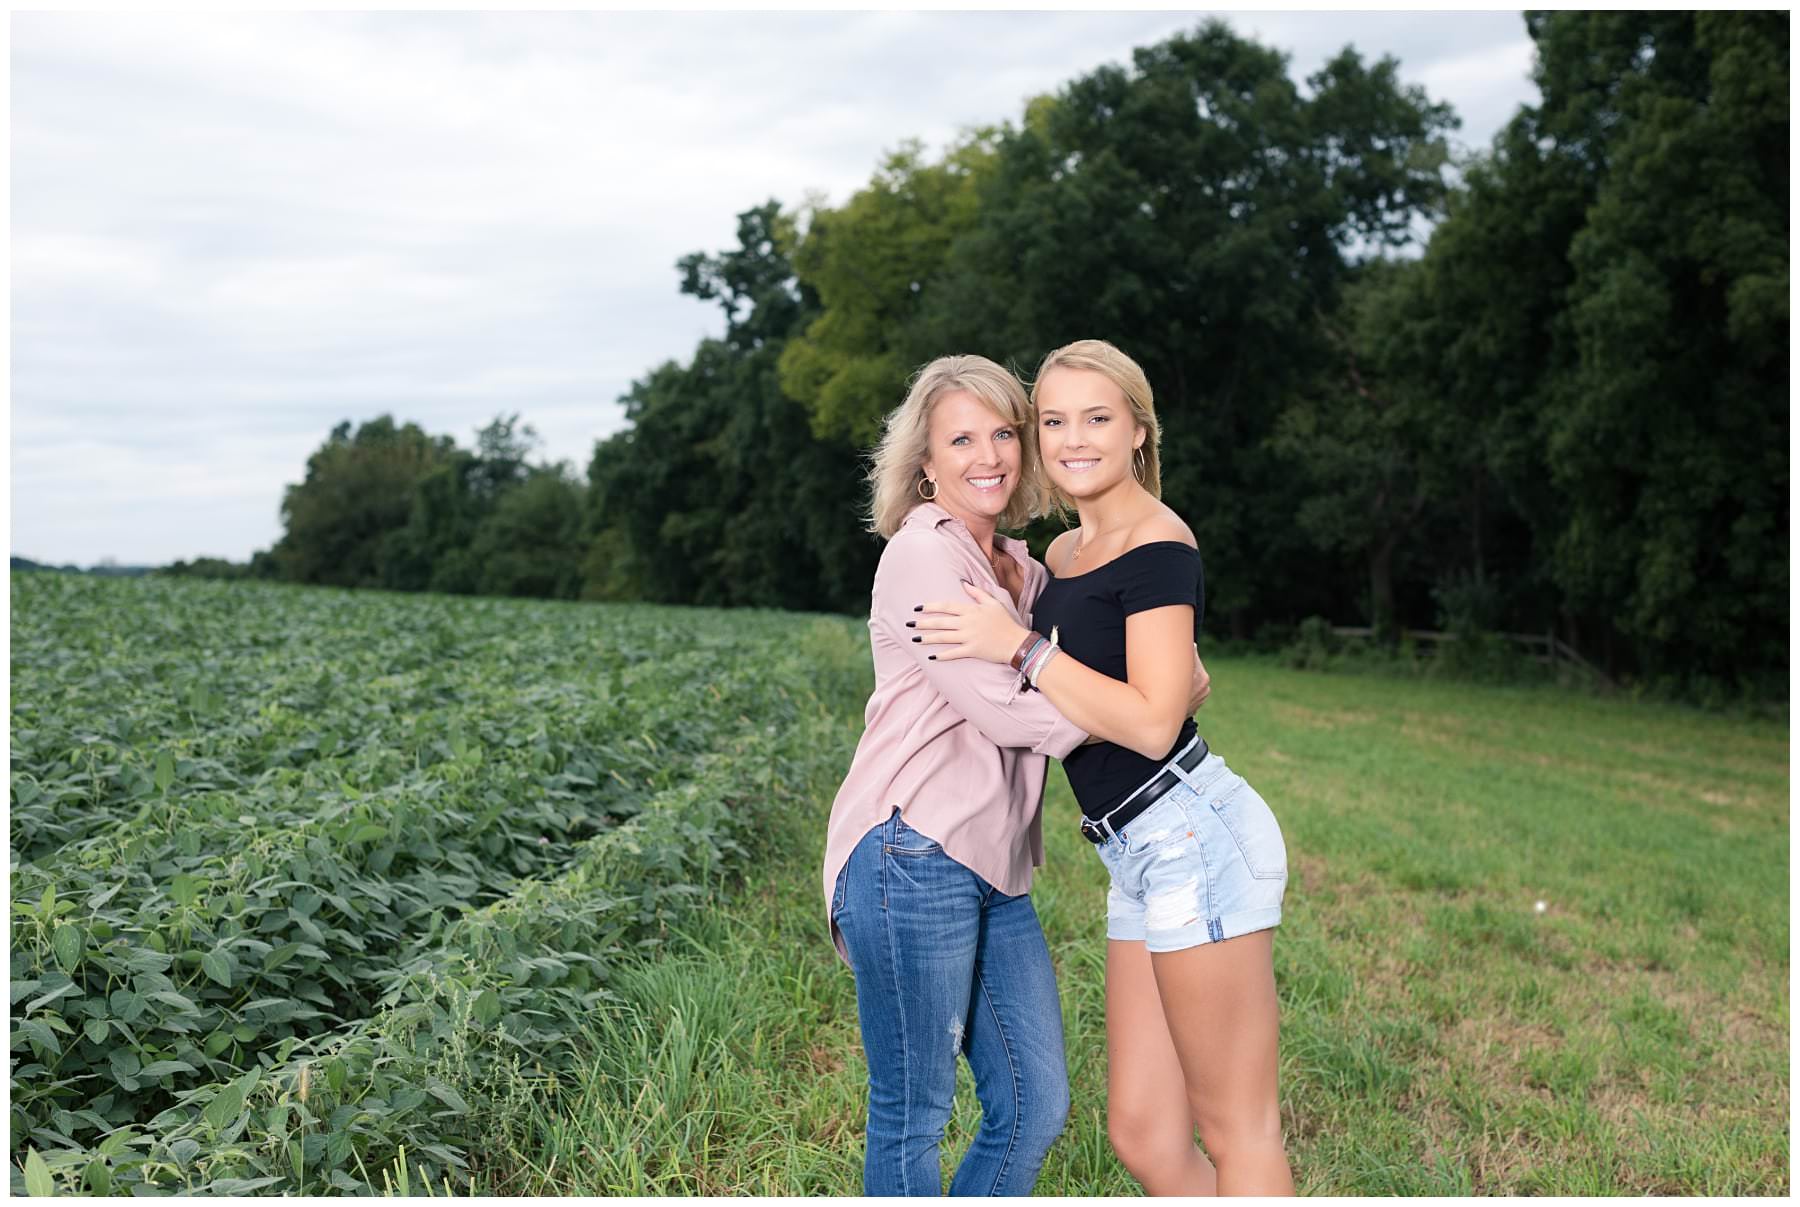 Outdoor senior portrait in a field with mom